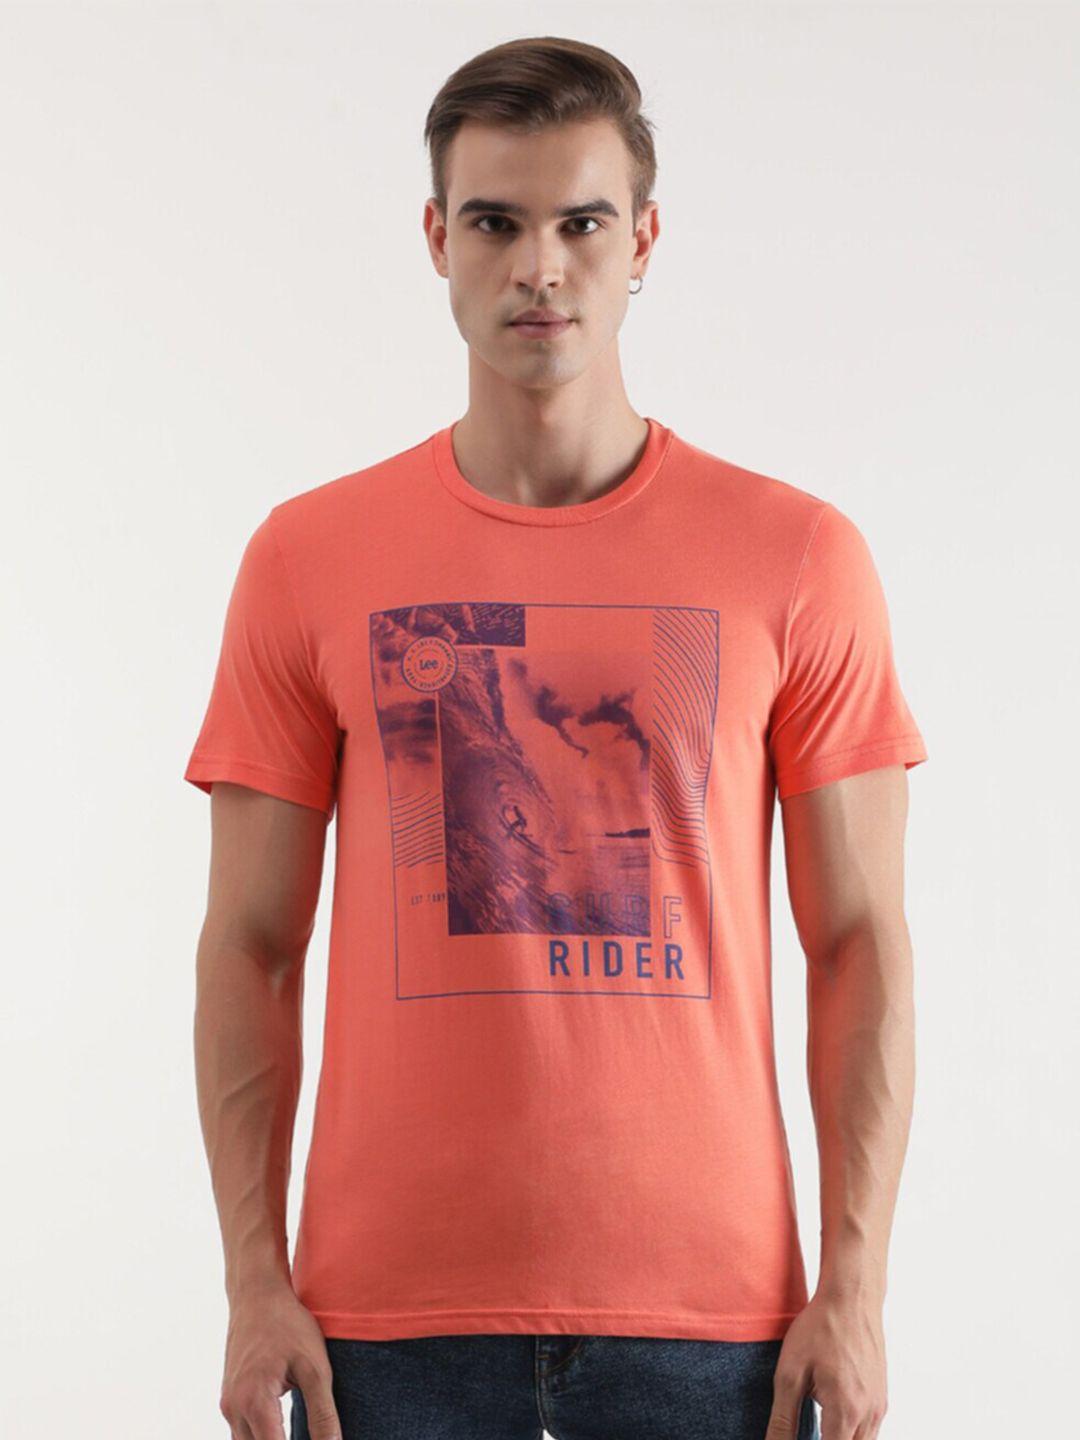 lee graphic printed cotton slim fit t-shirt